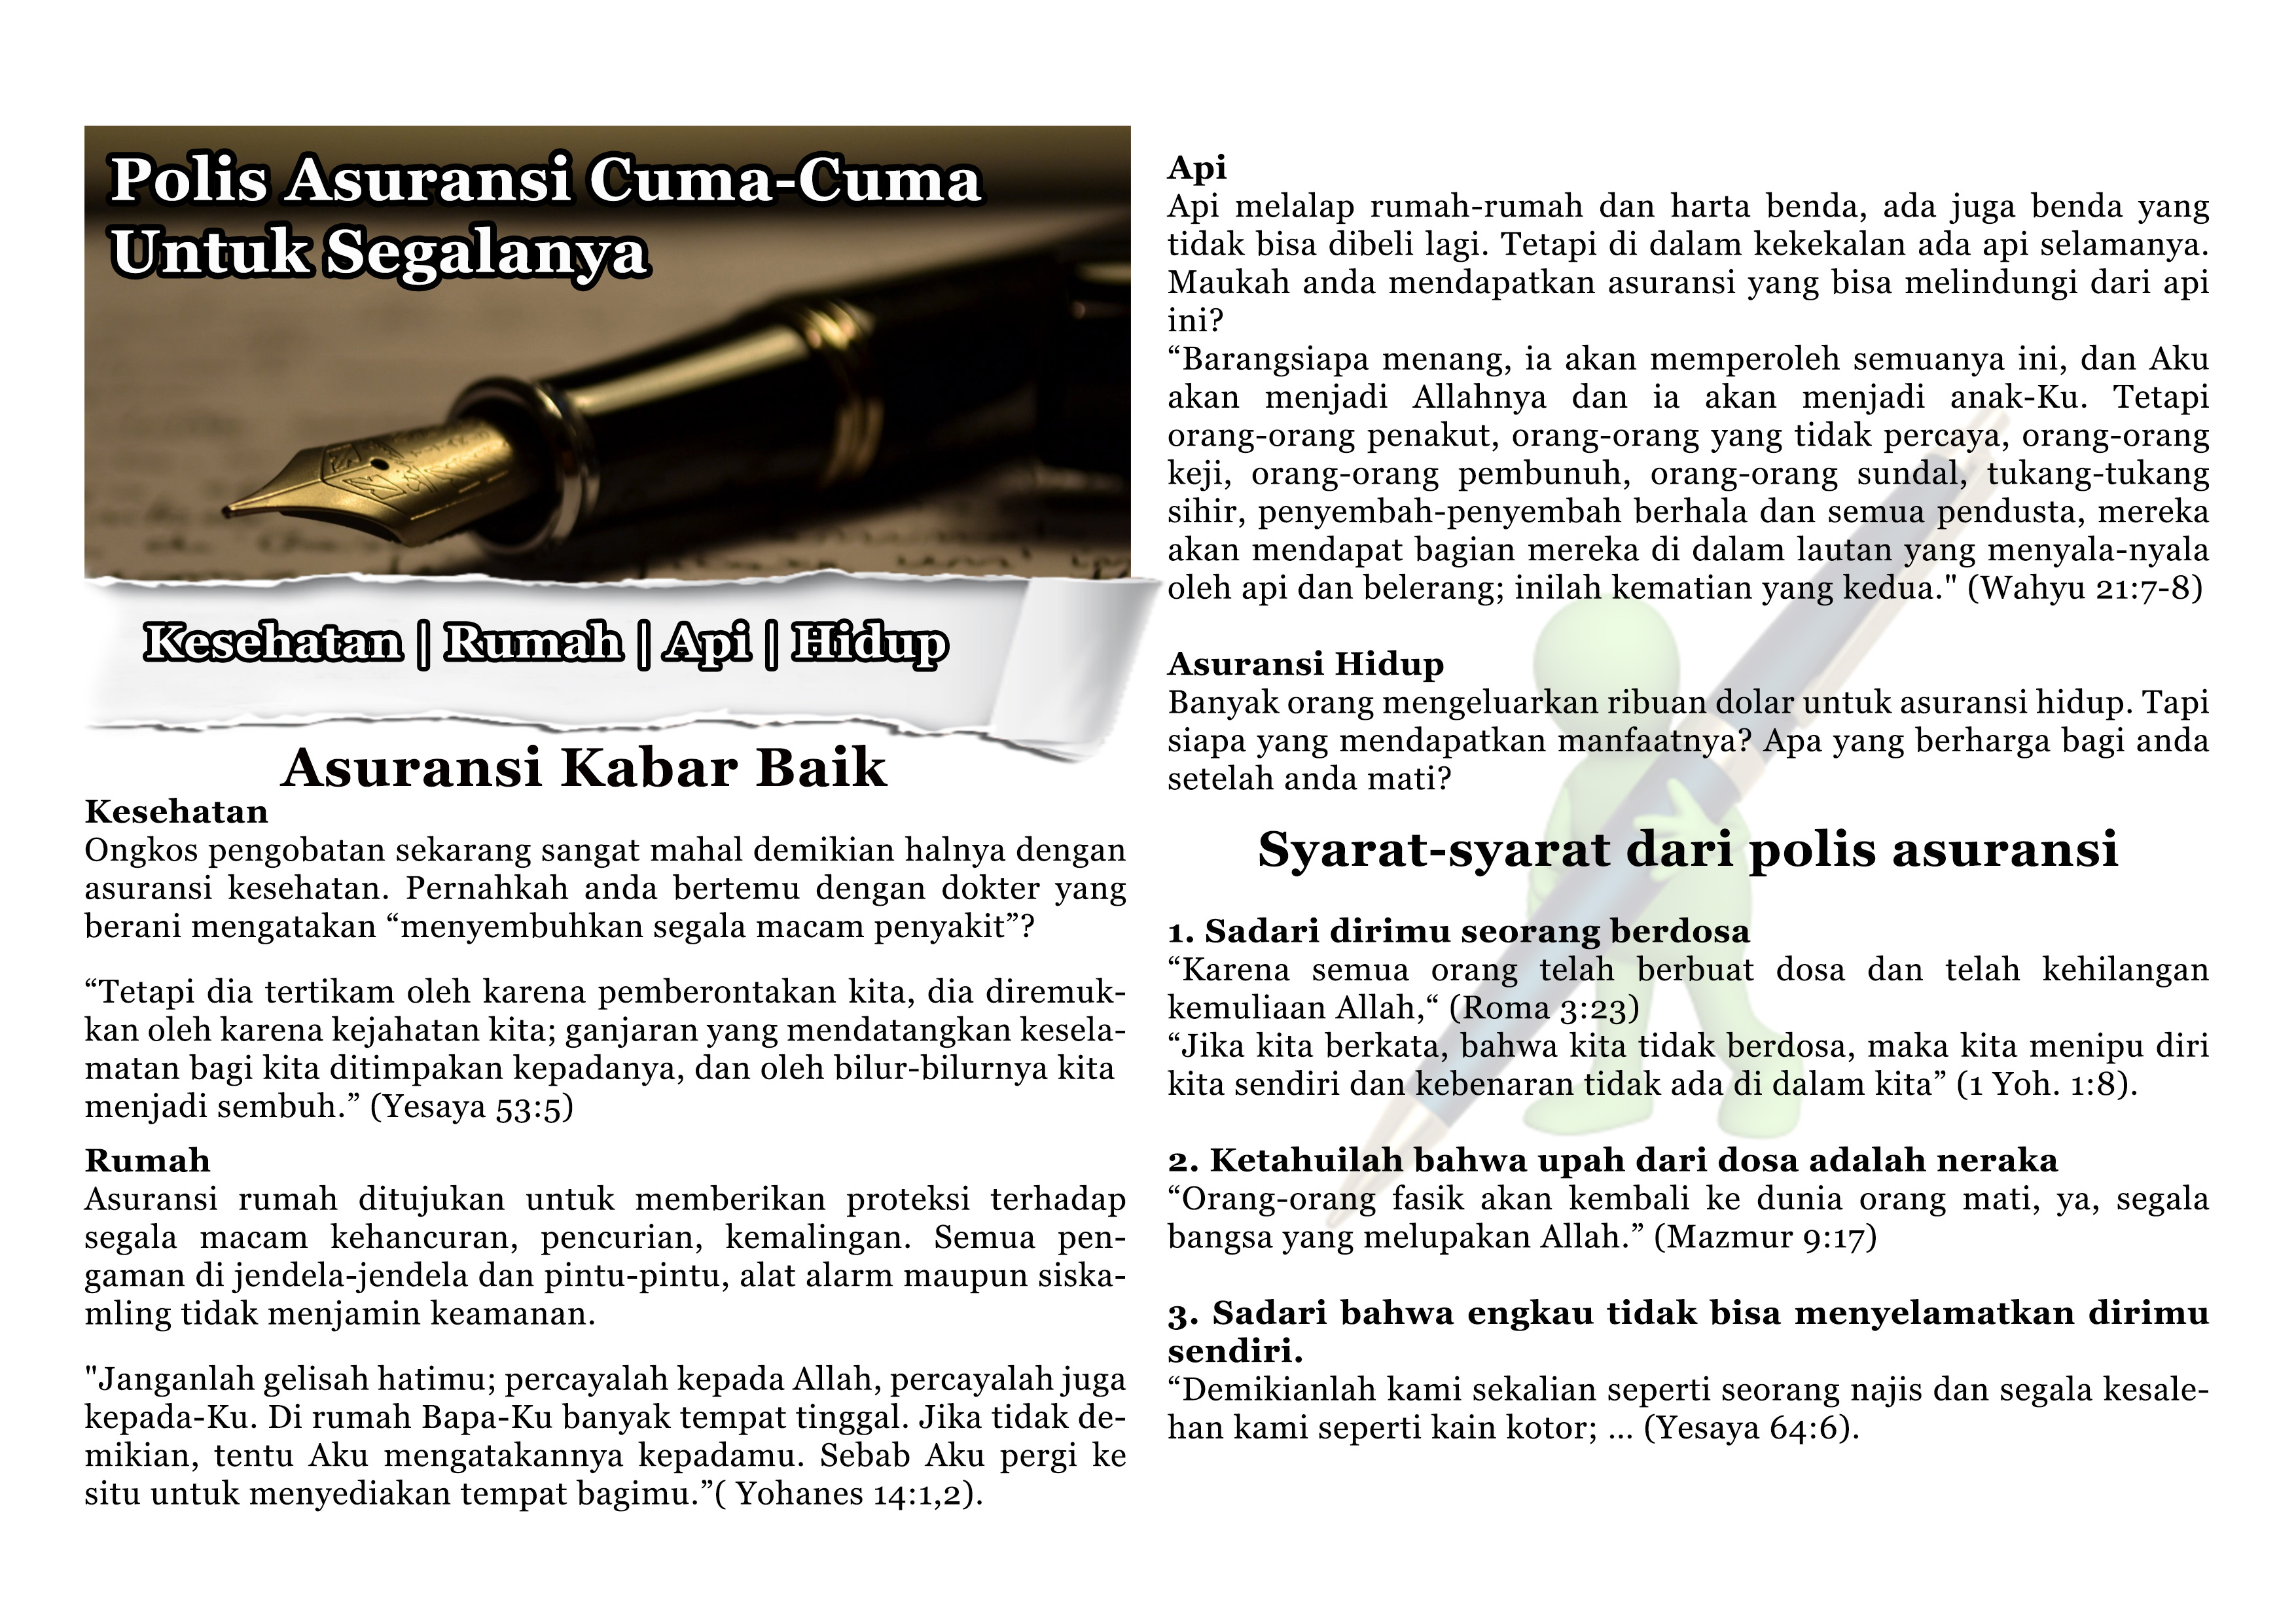 Insurance policy indo